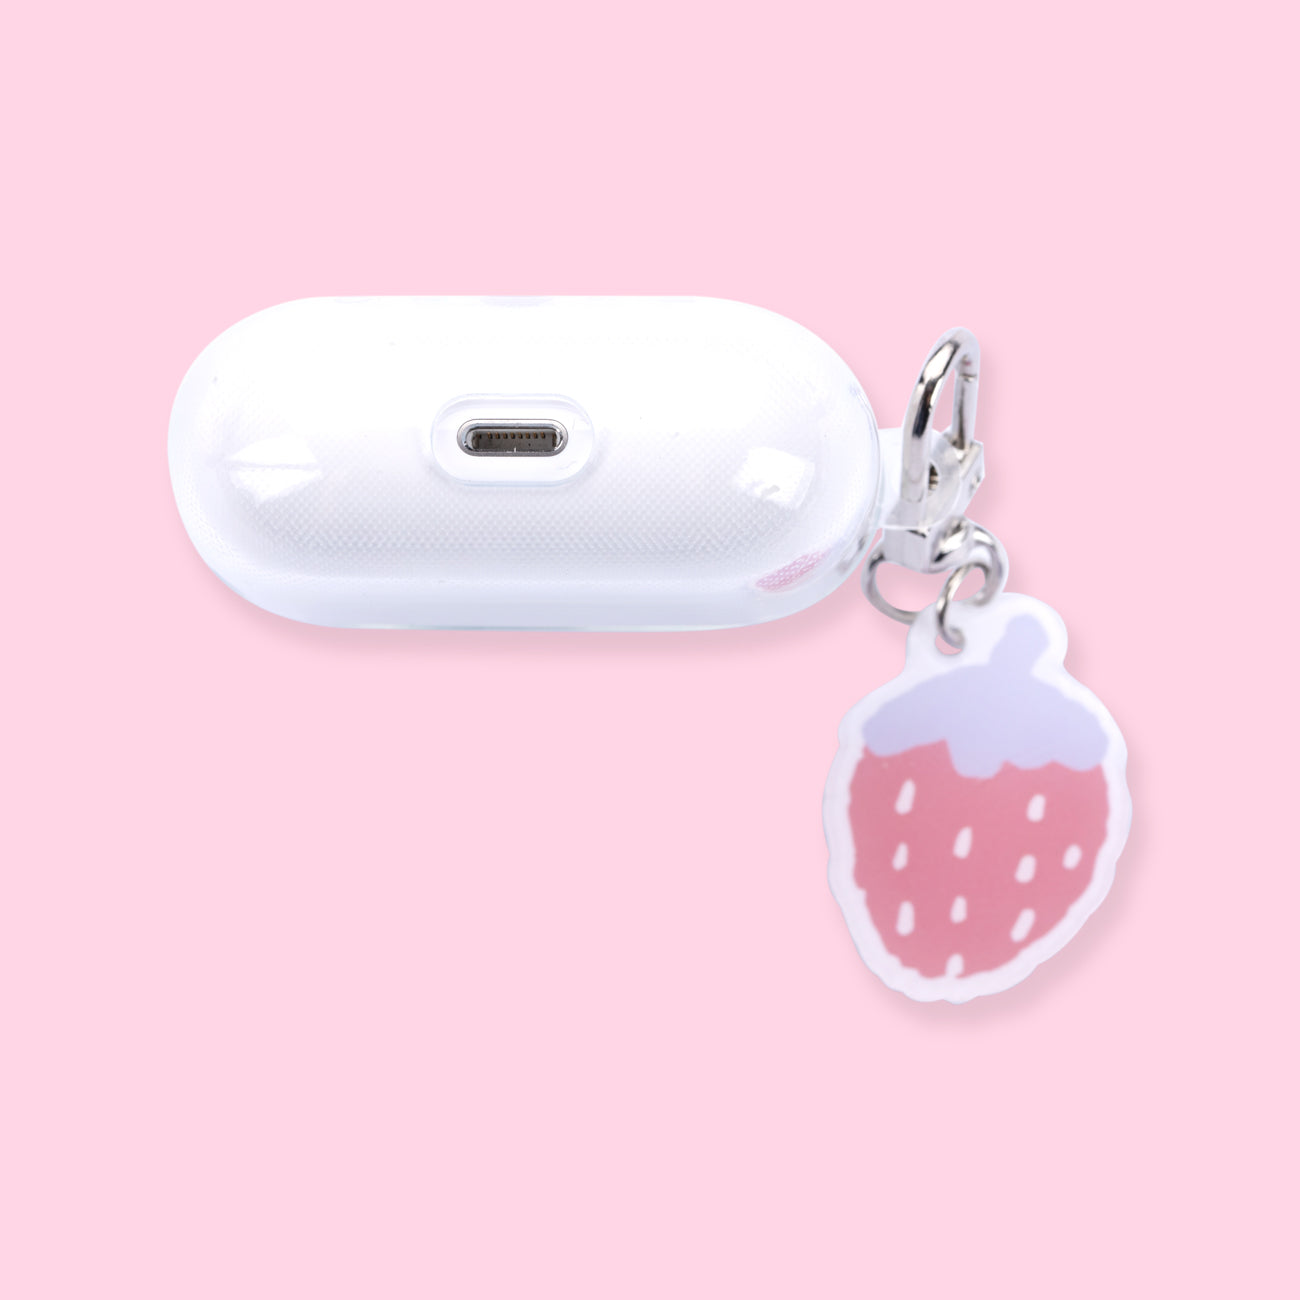 AirPods 3rd Generation Case - Strawberry Milk - Transparent